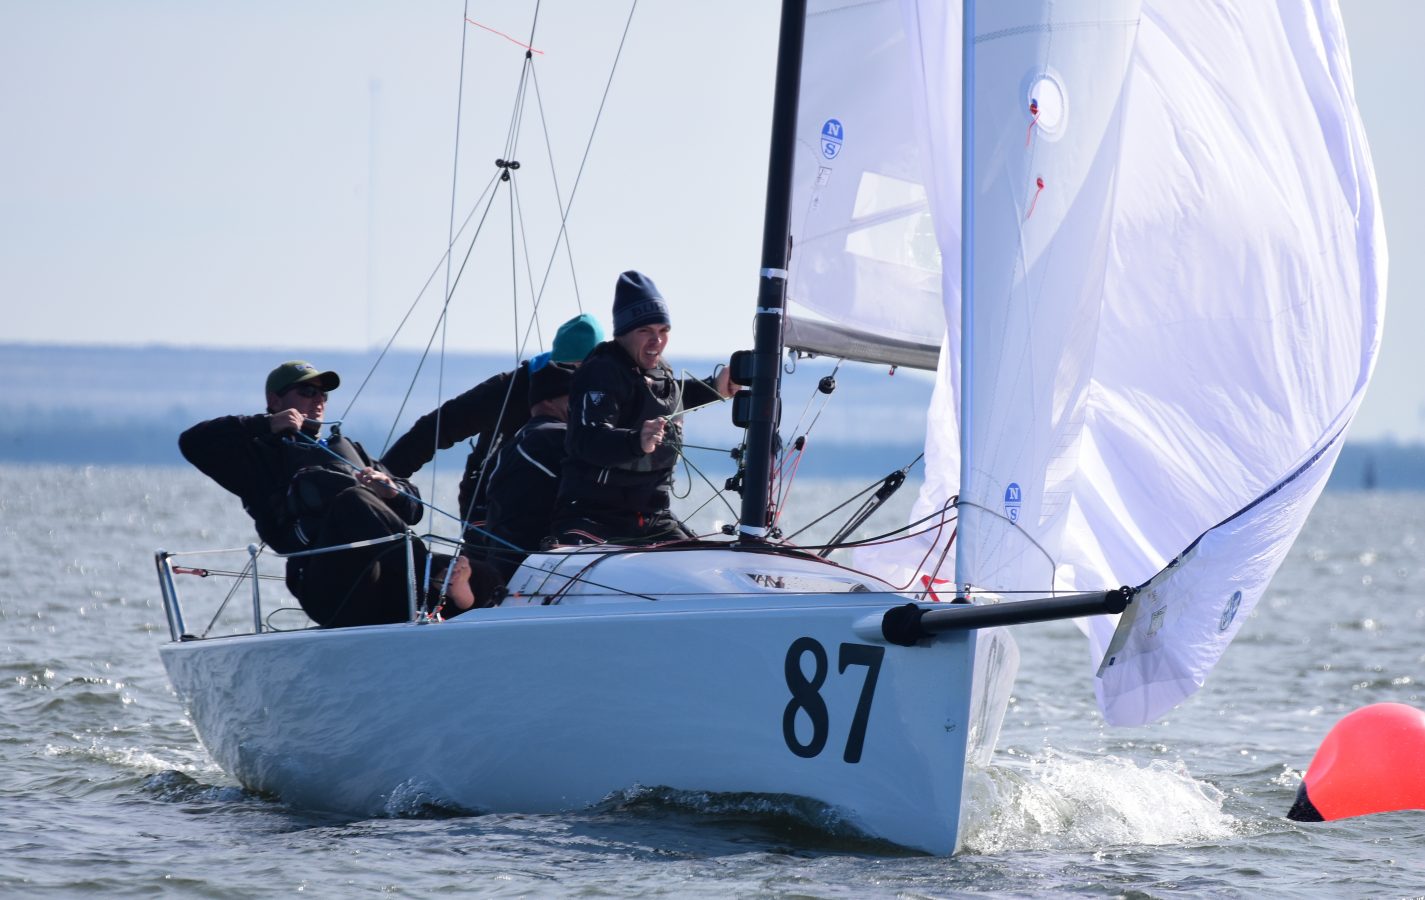 J/70 DOWNWIND TIPS - MARGINAL PLANING CONDITIONS